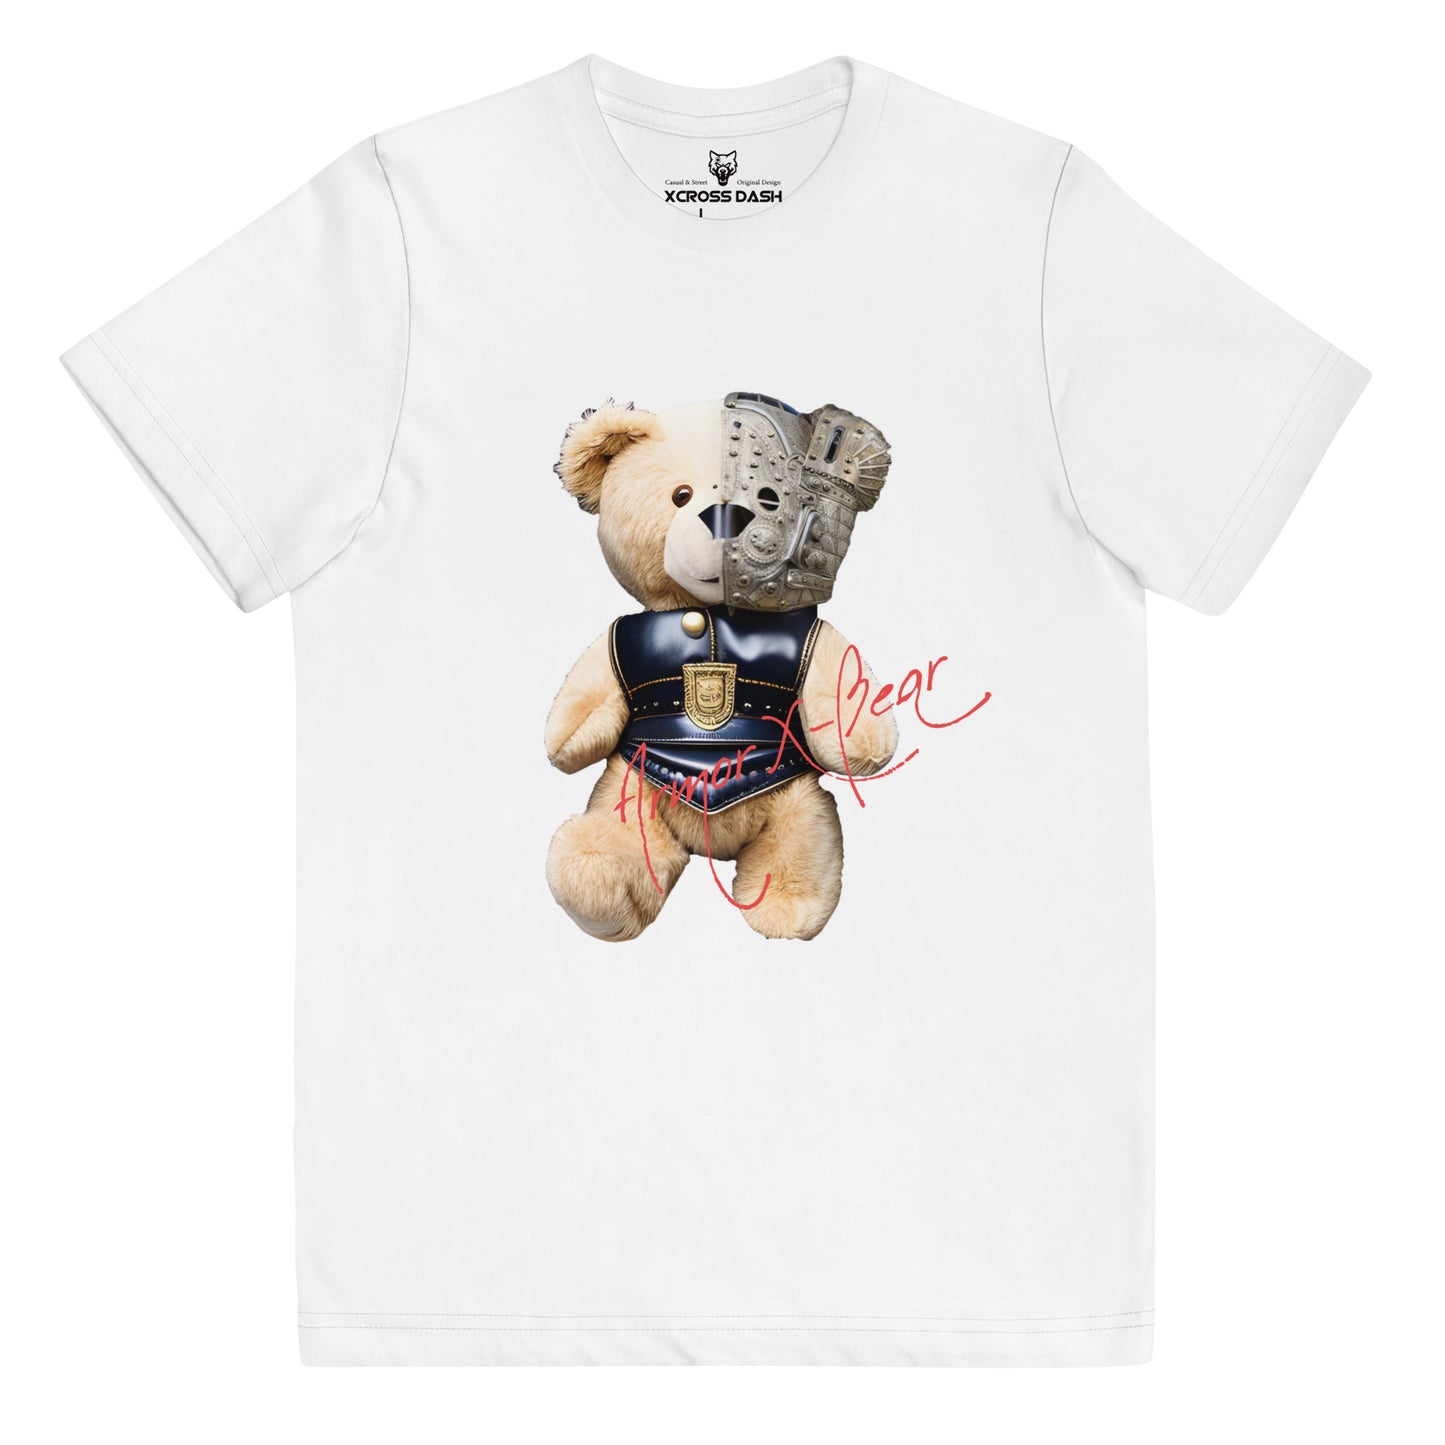 ARMOR X-BEAR LIMITED DESIGN MACHIN NO.9 TYPE-C | Youth jersey t-shirt | 5colors